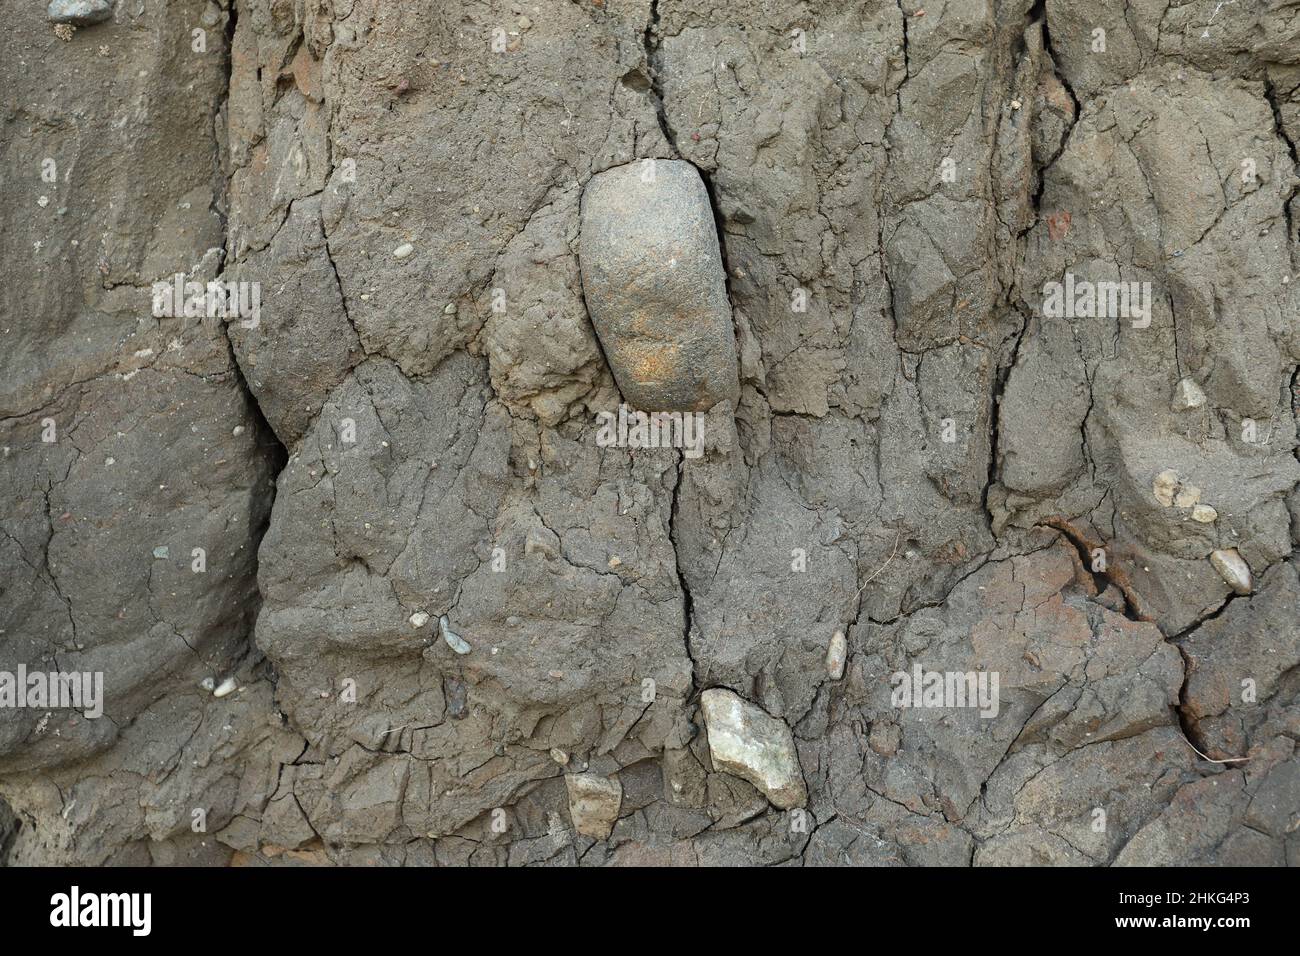 Stone in clay soil with cracks deposit in wall Stock Photo